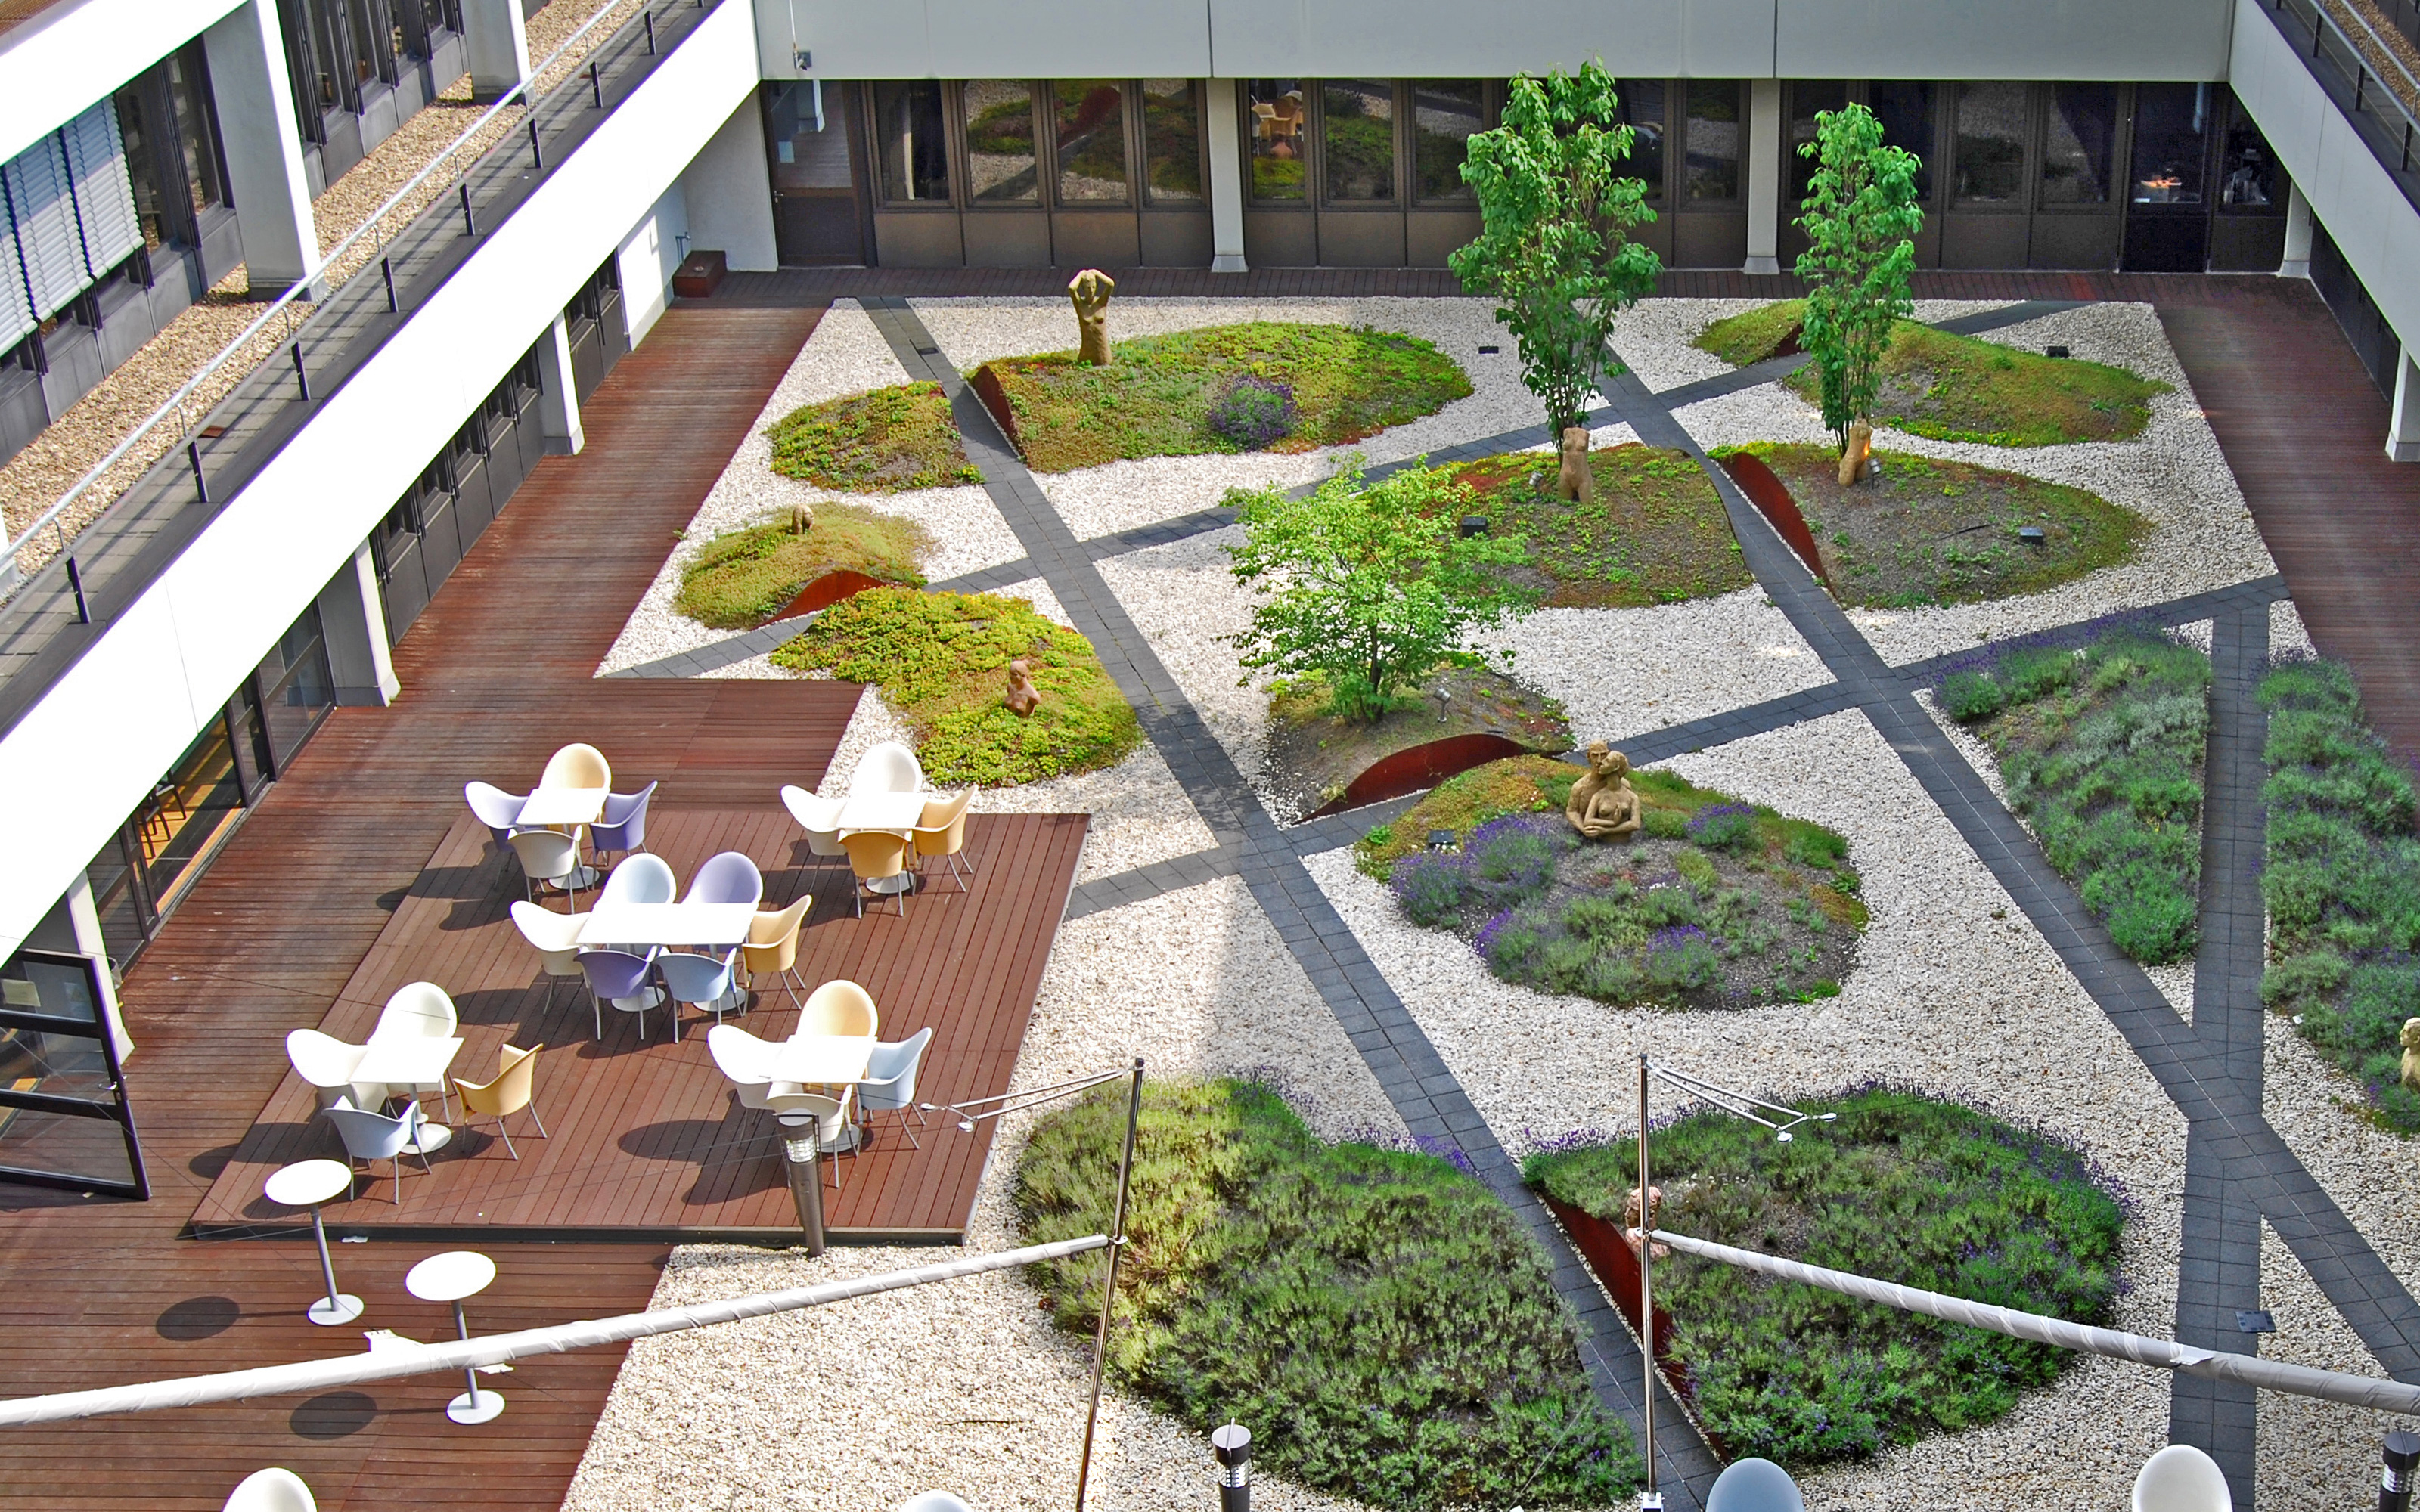 Courtyard with wooden deck, seating, gravel and plantbeds